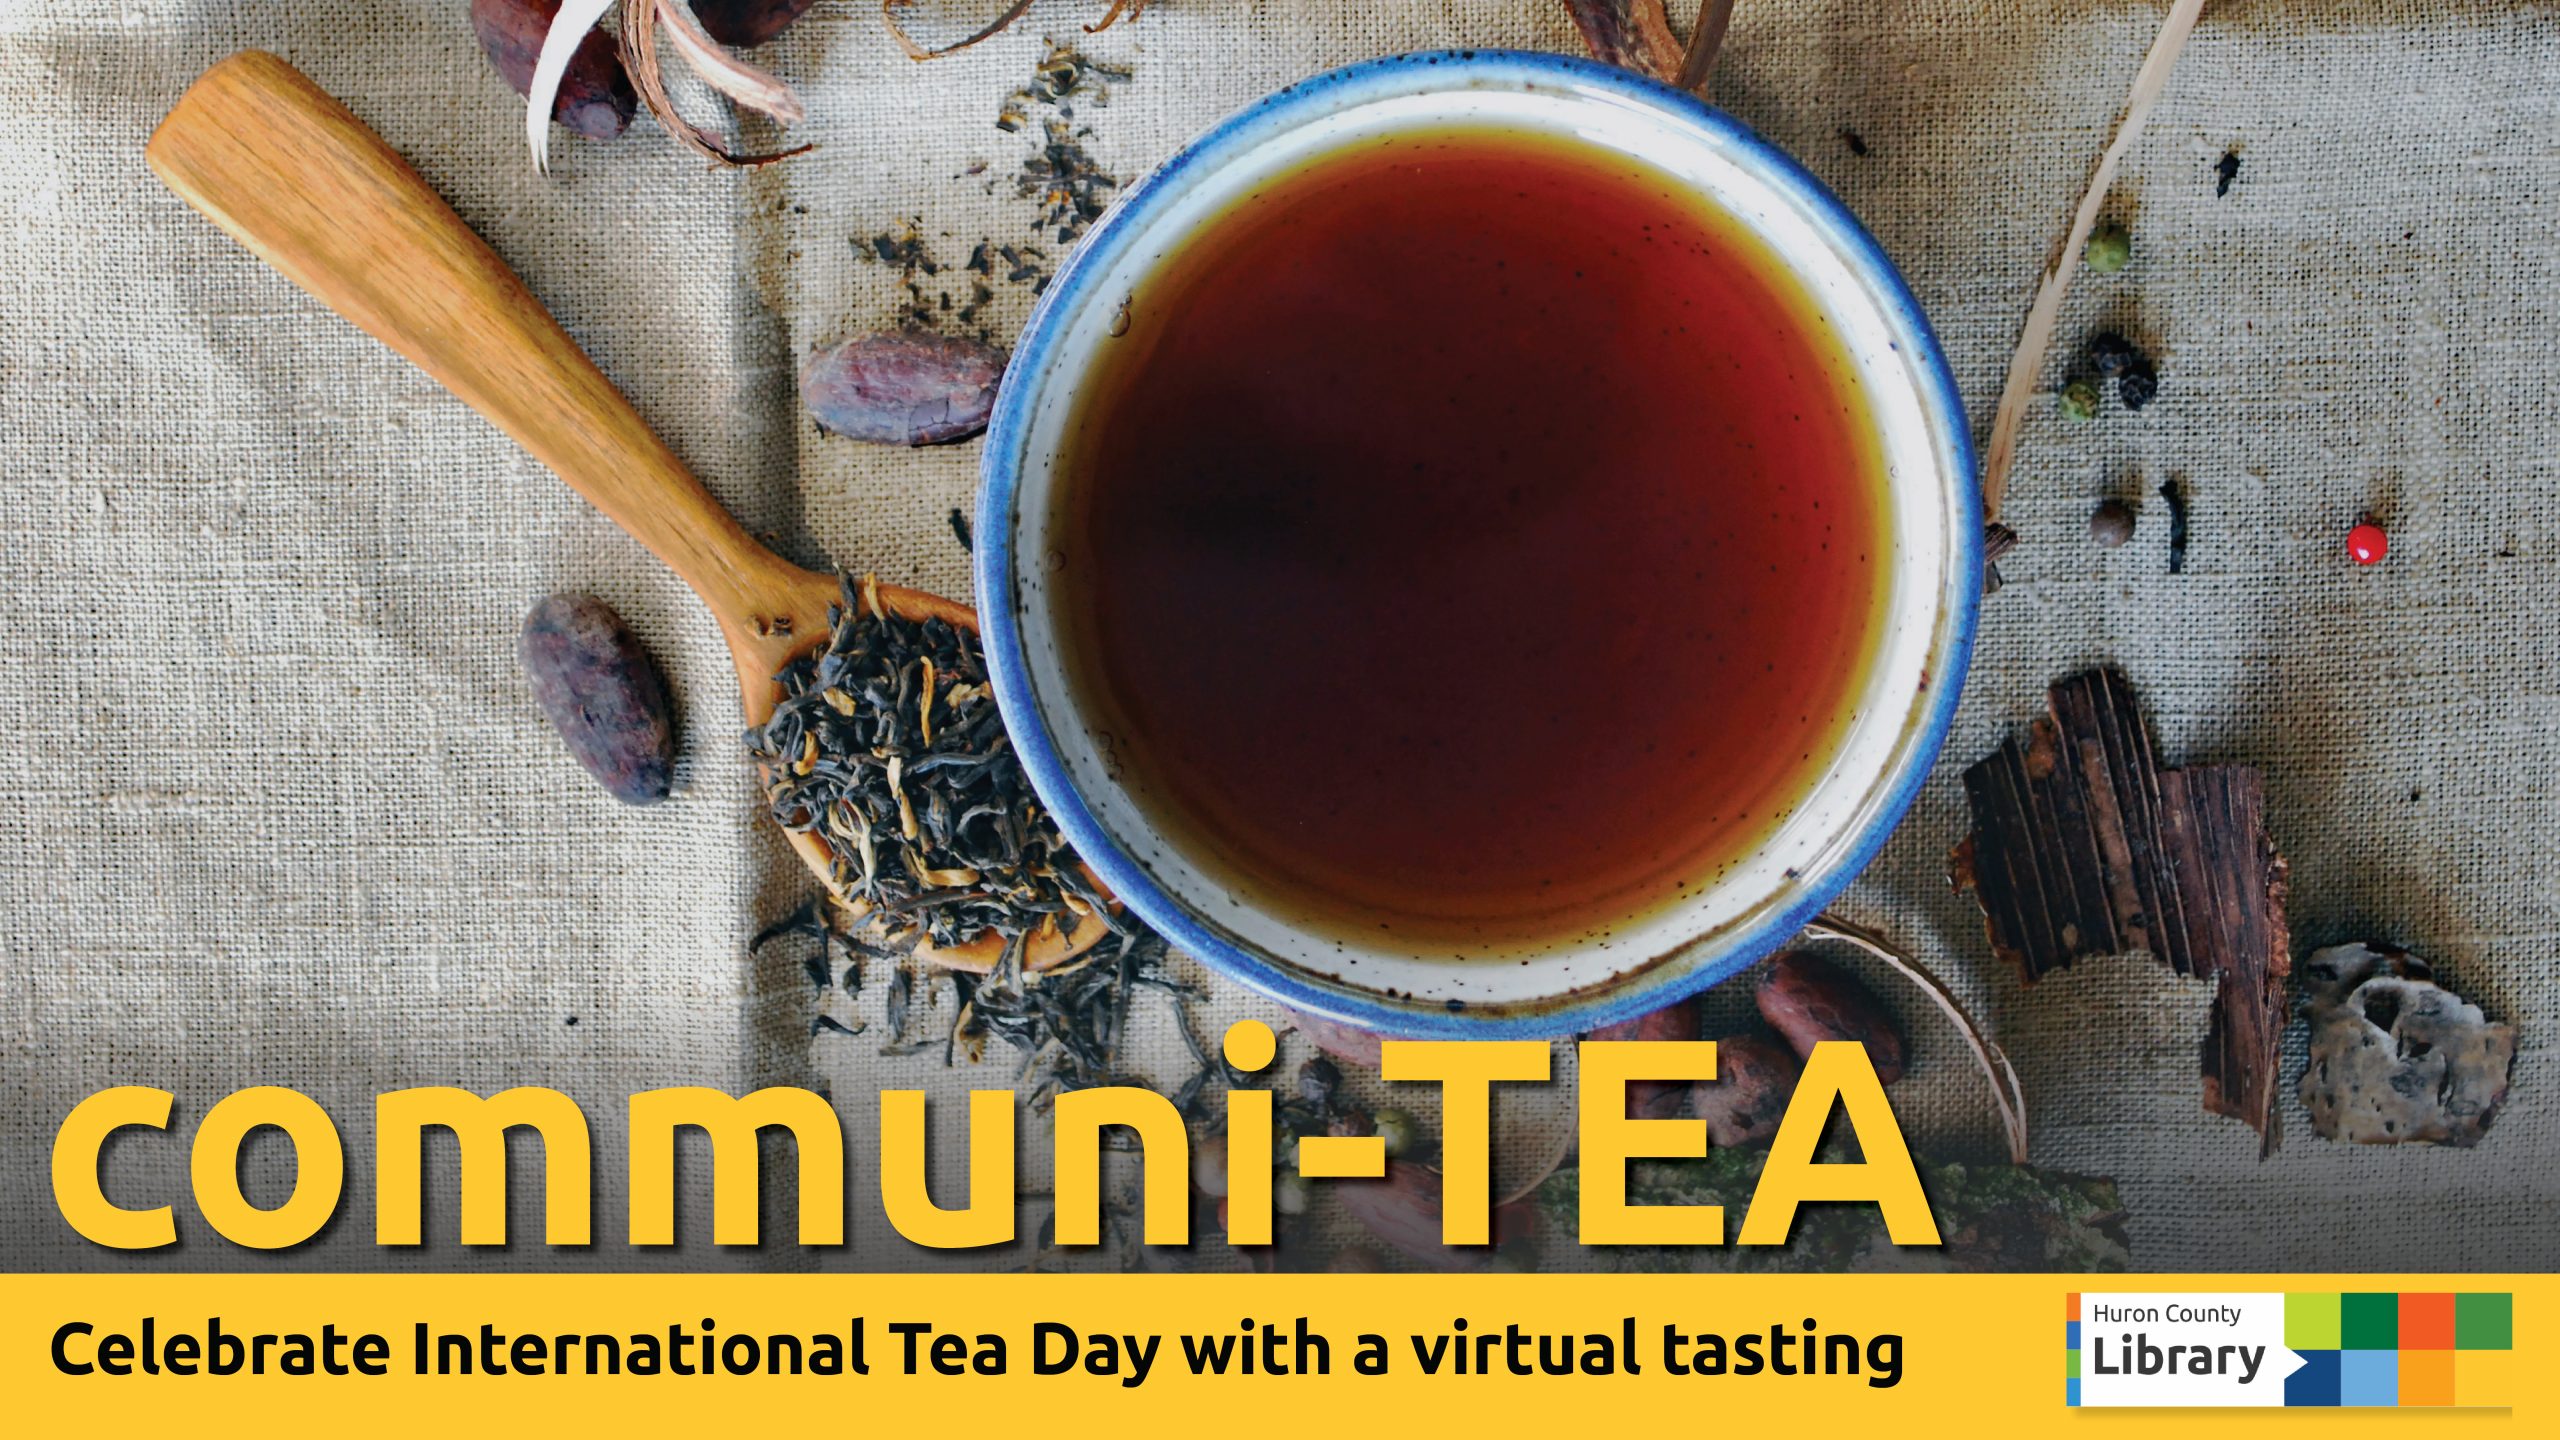 Photo of a cup of tea and tea leaves with text promoting tea event